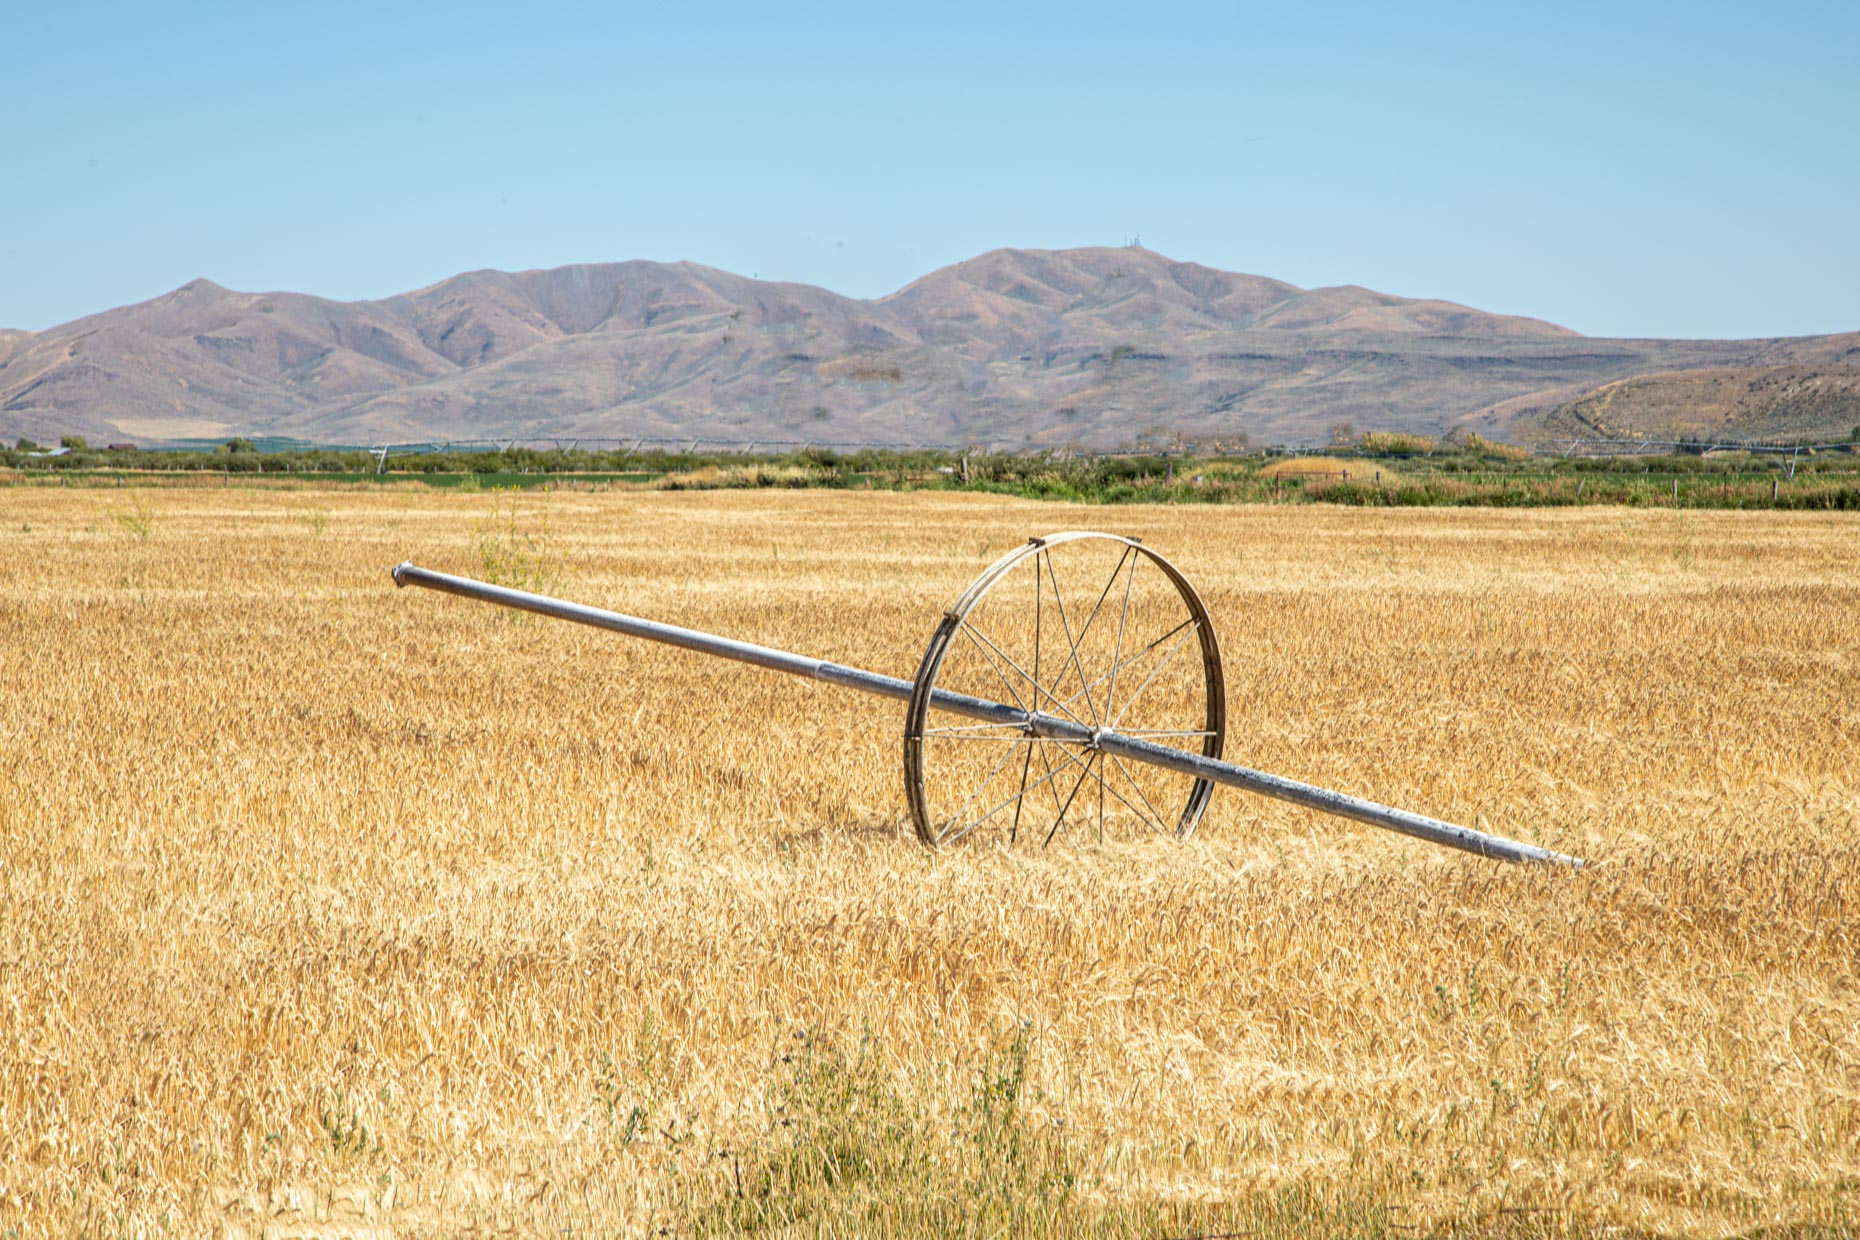 Abandoned Irrigation Equipment in Wheat